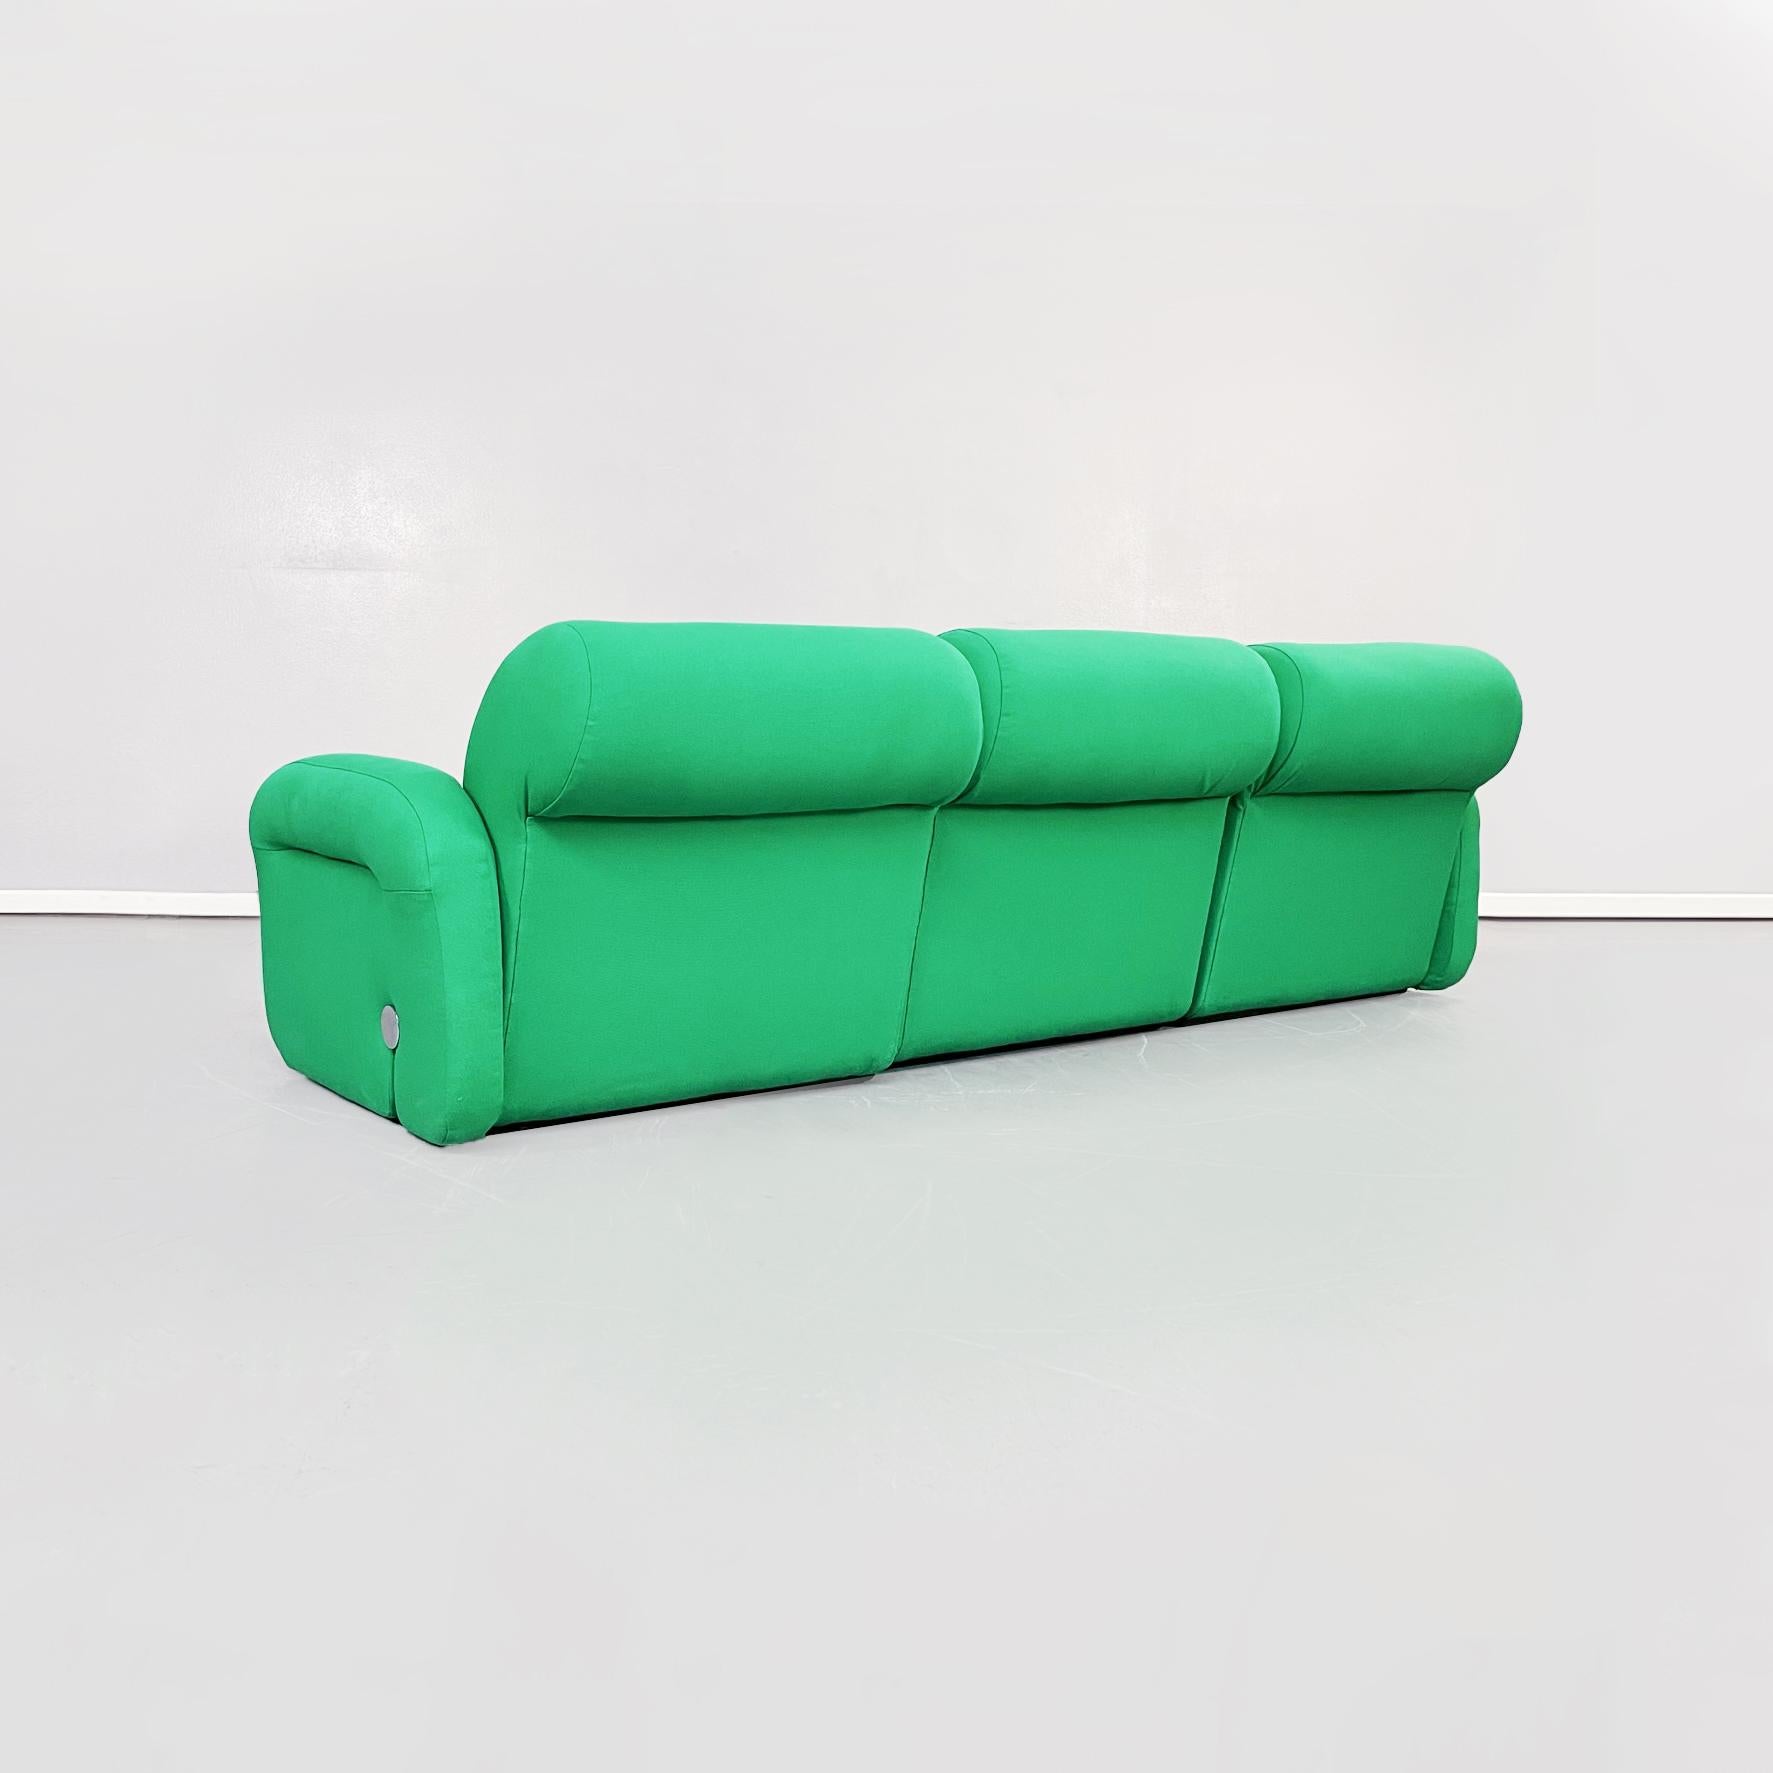 Late 20th Century Italian Space Age Modular Sofa in Green Fabric with Metal Insert, 1970s For Sale